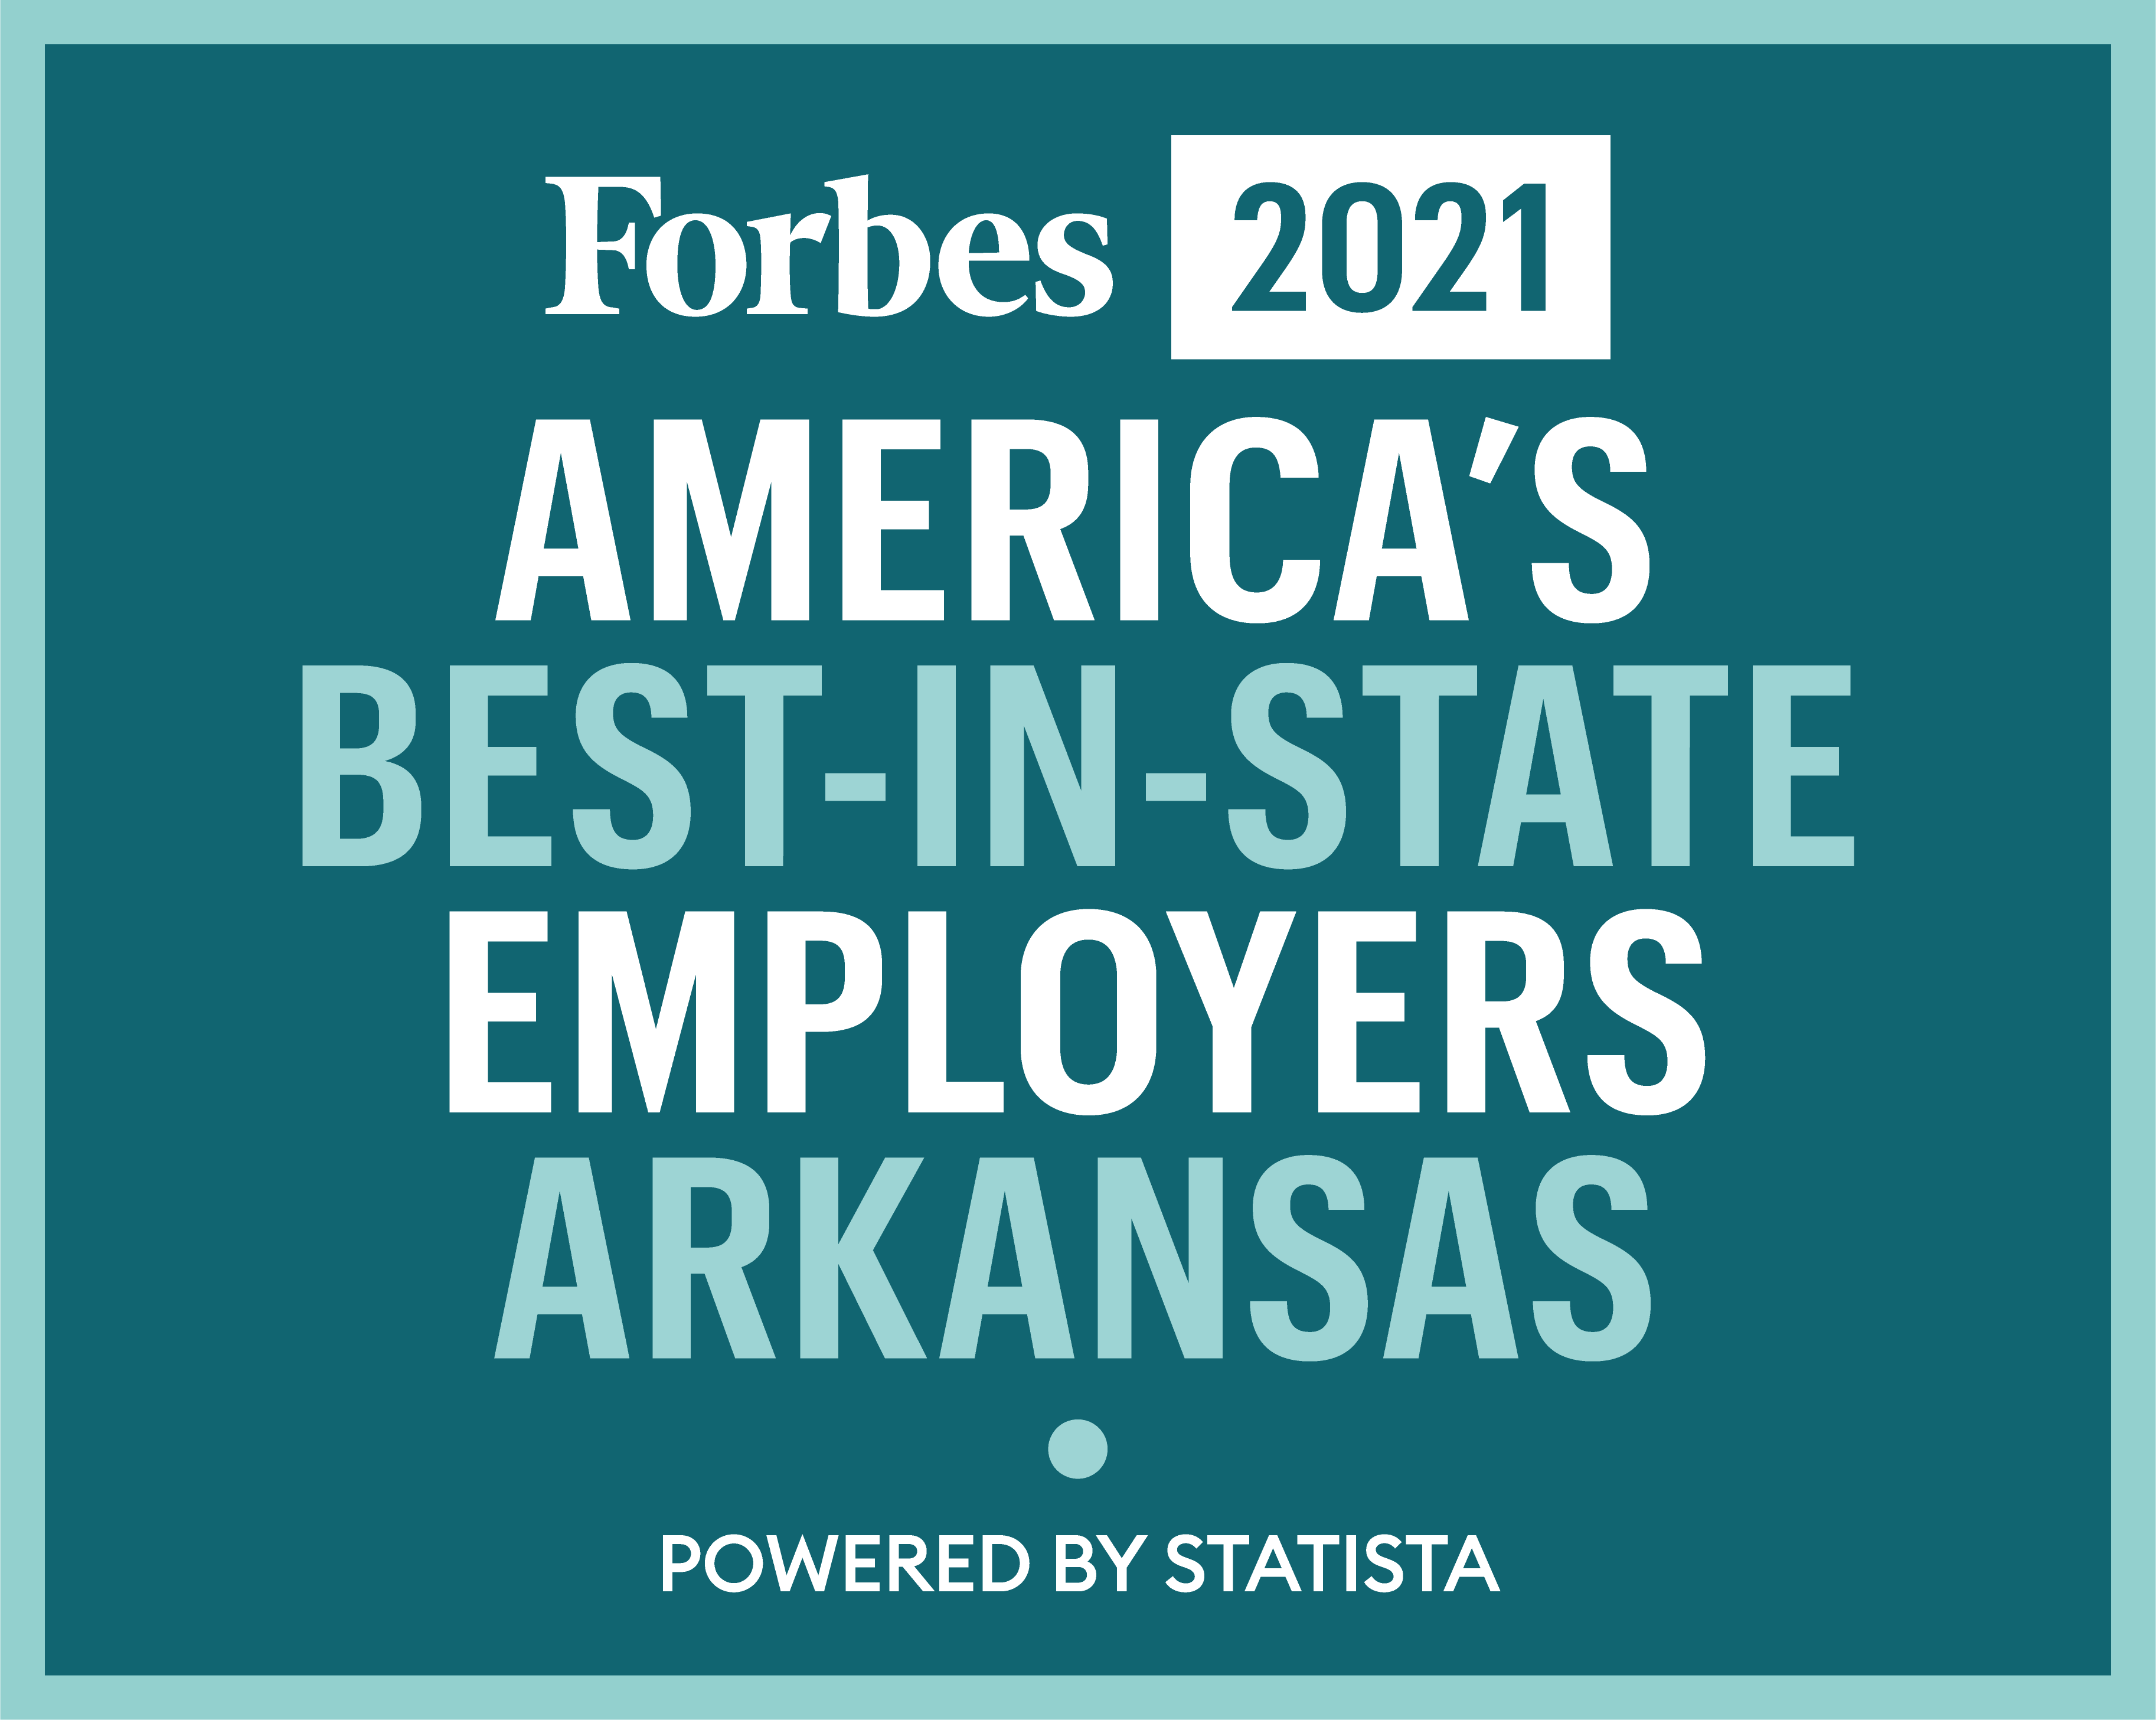 ArcBest named a top Arkansas employer by Forbes